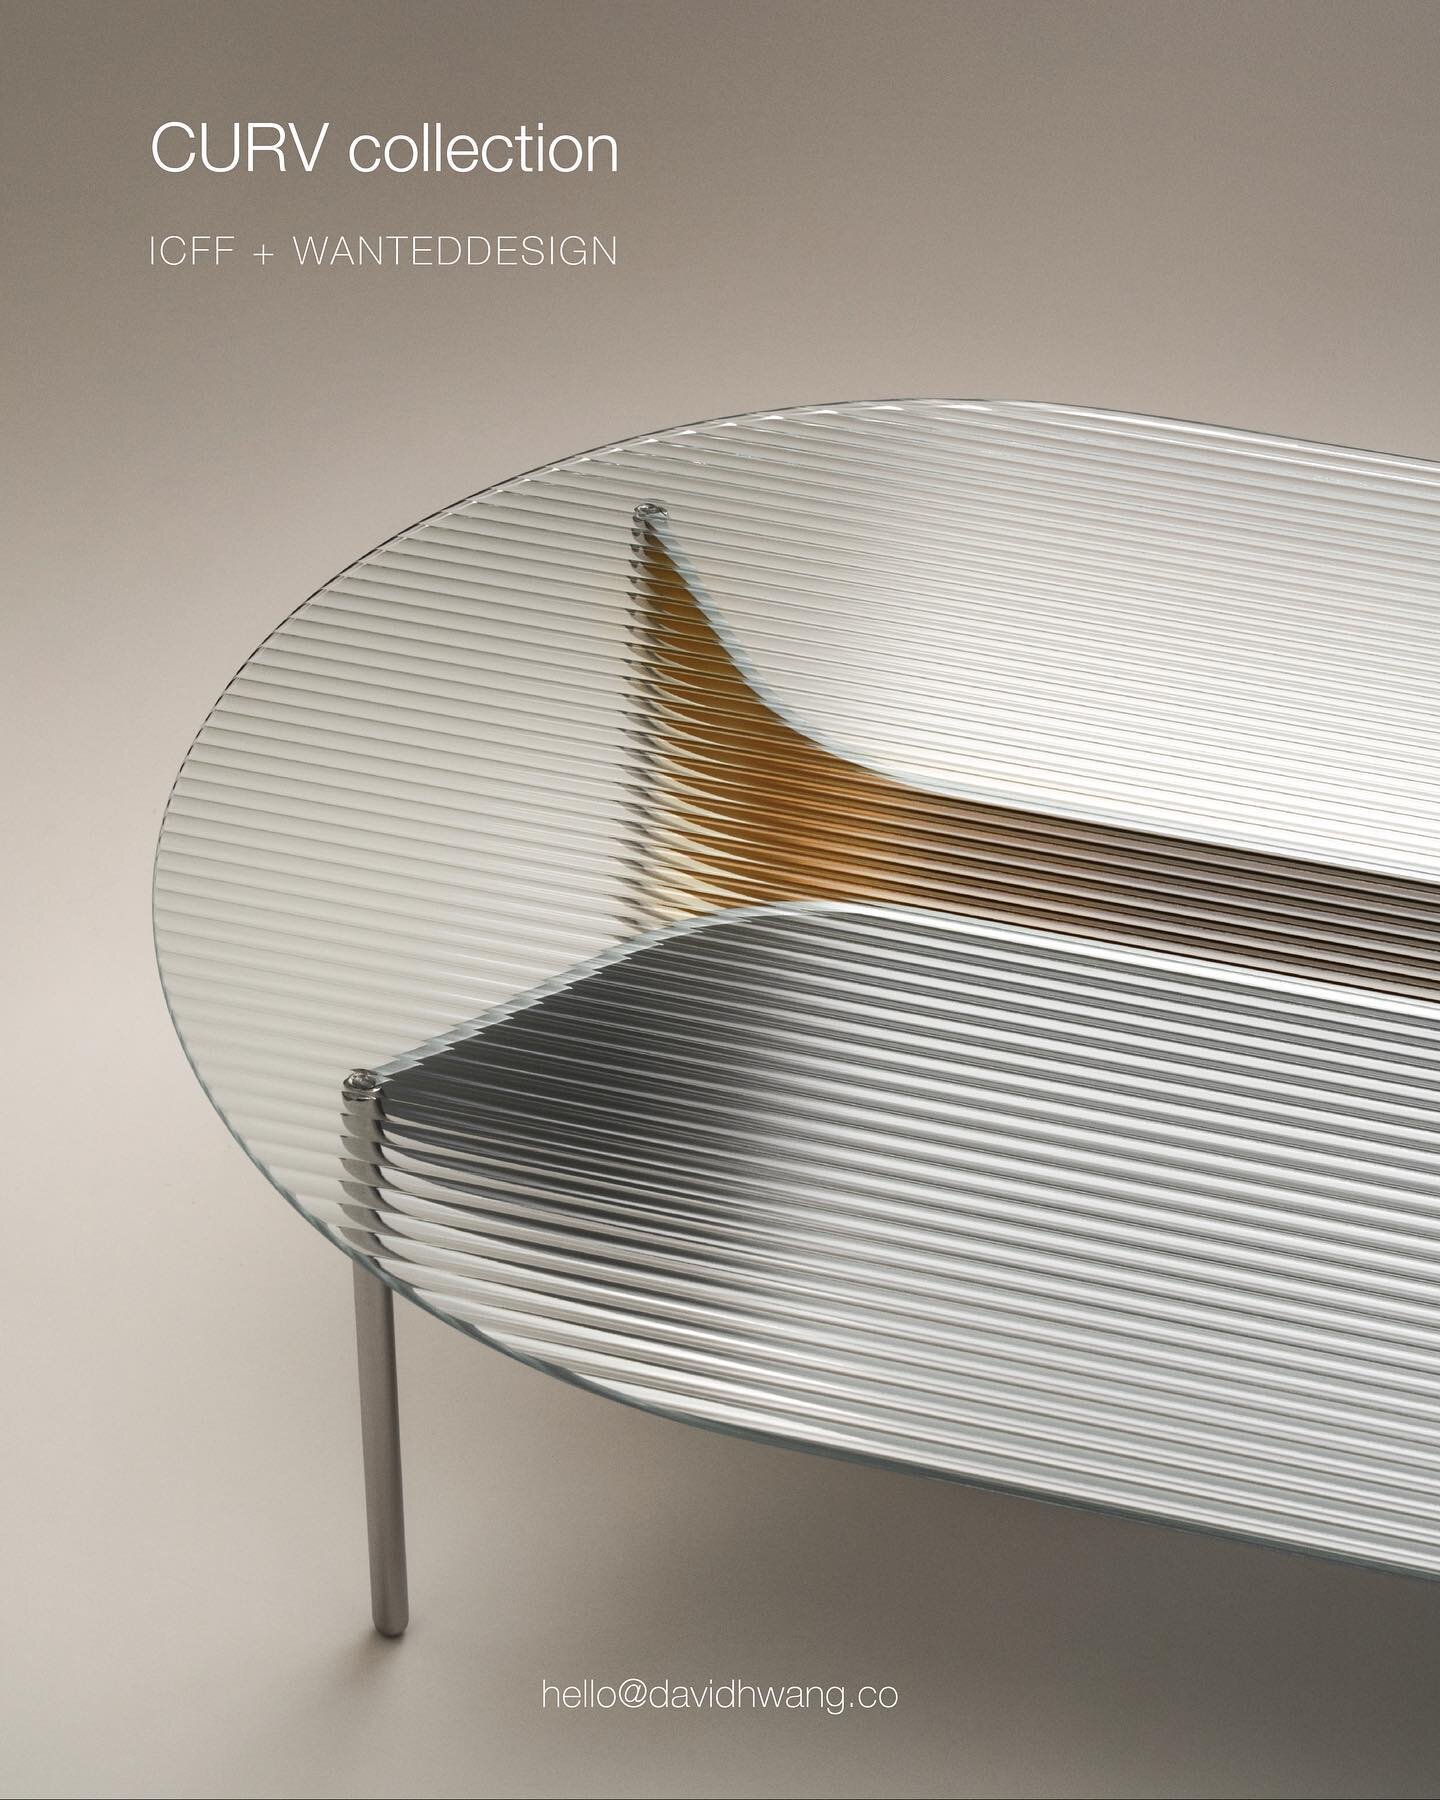 Excited to share that this Sunday, I will be talking about my CURV collection at the main stage during the ICFF + WantedDesign Talks! Come by!
-
ICFF + WantedDesign, Javits Center
Booth W62
May 21-23